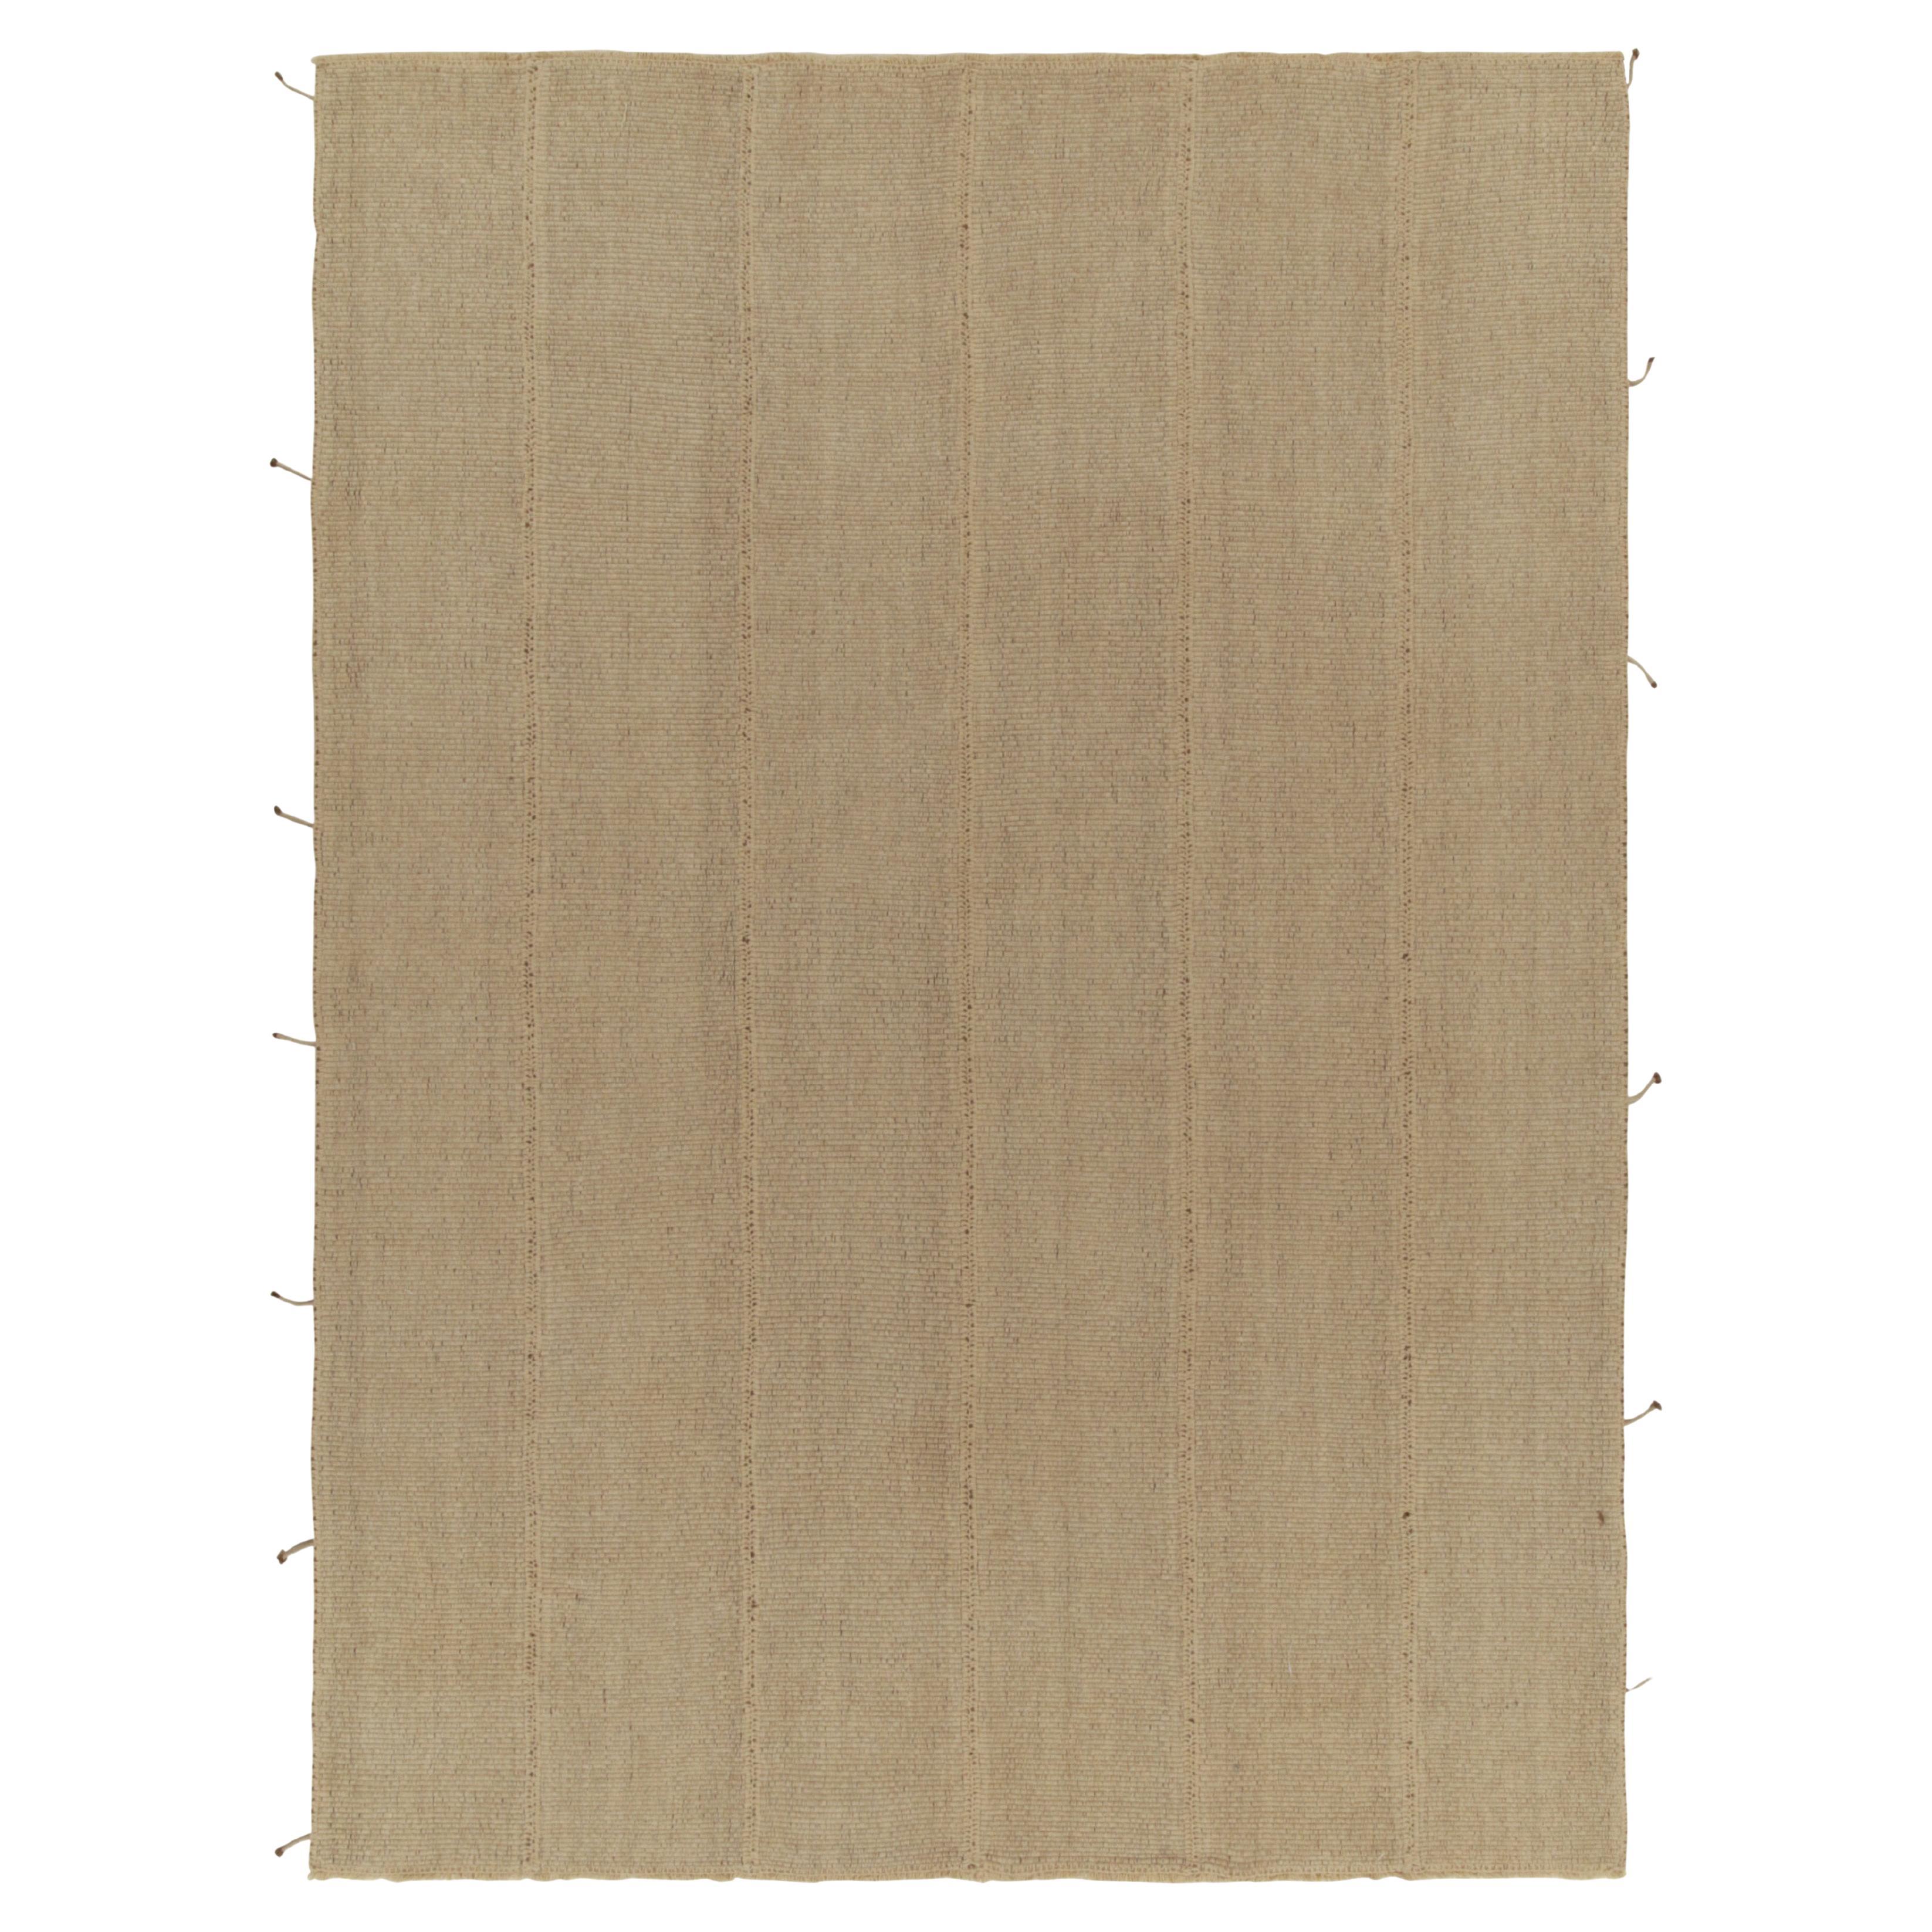 Rug & Kilim’s Contemporary Kilim in Solid, Sandy Beige-Brown Panel Woven Style For Sale